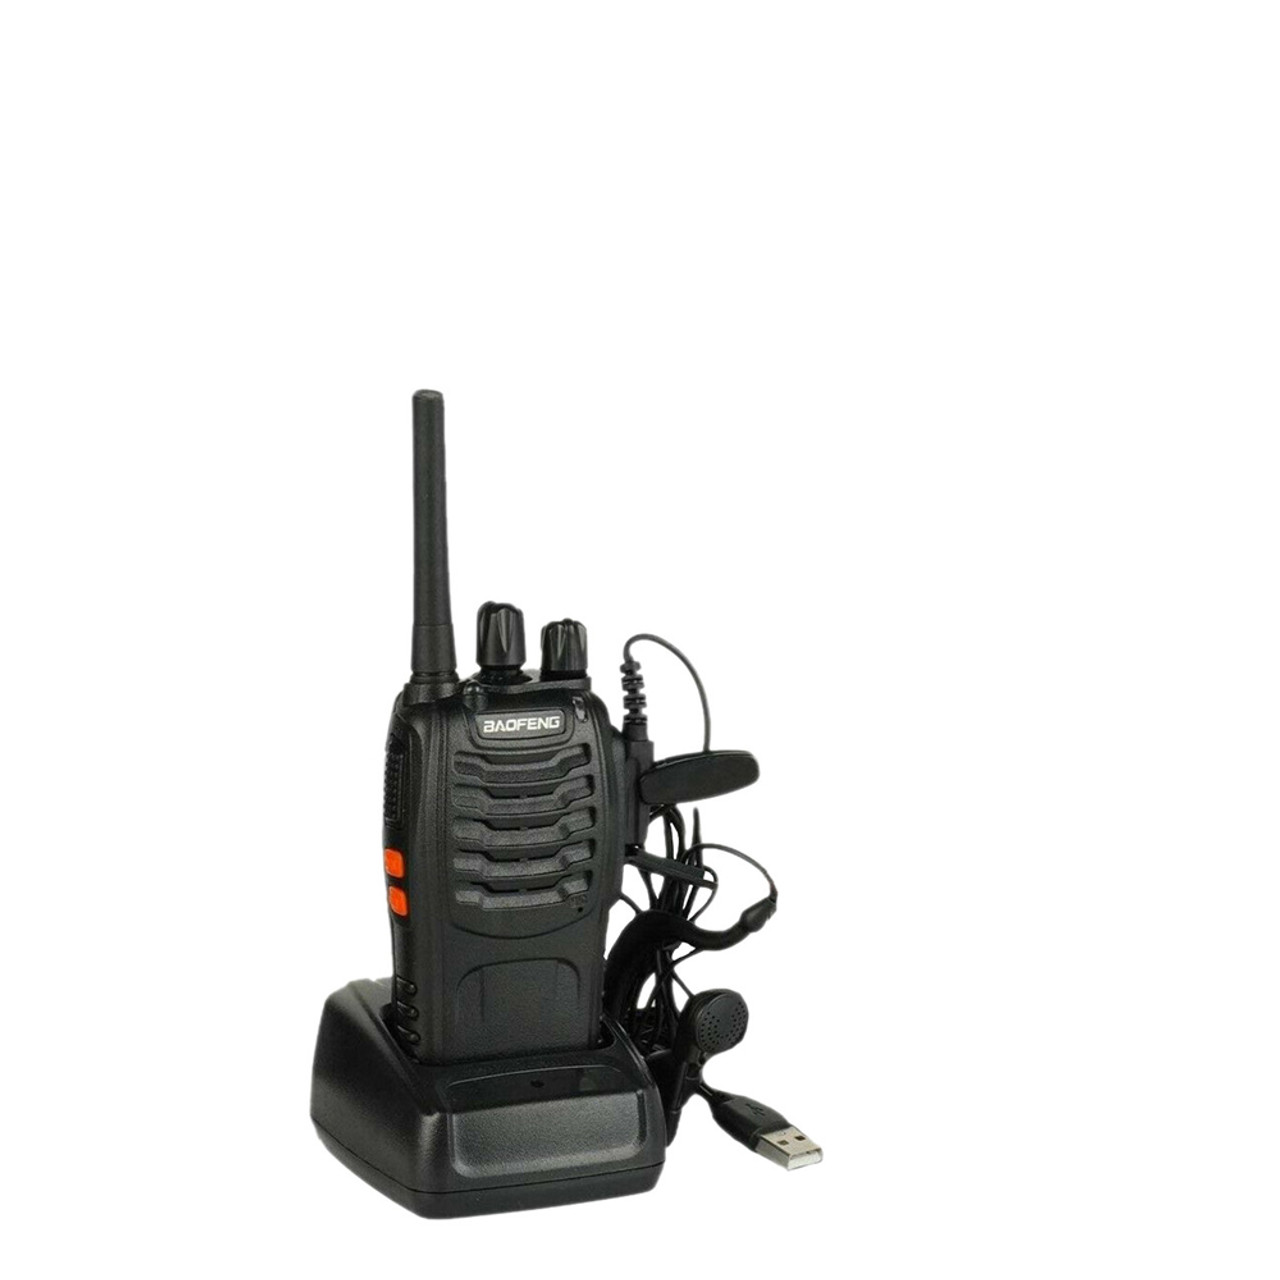 BAOFENG BF-88 A Walkie Talkies Way Charger Bulk FRS Radio License-Free Long Range 16 Channels Two Way Radio Pack 6個入り - 6